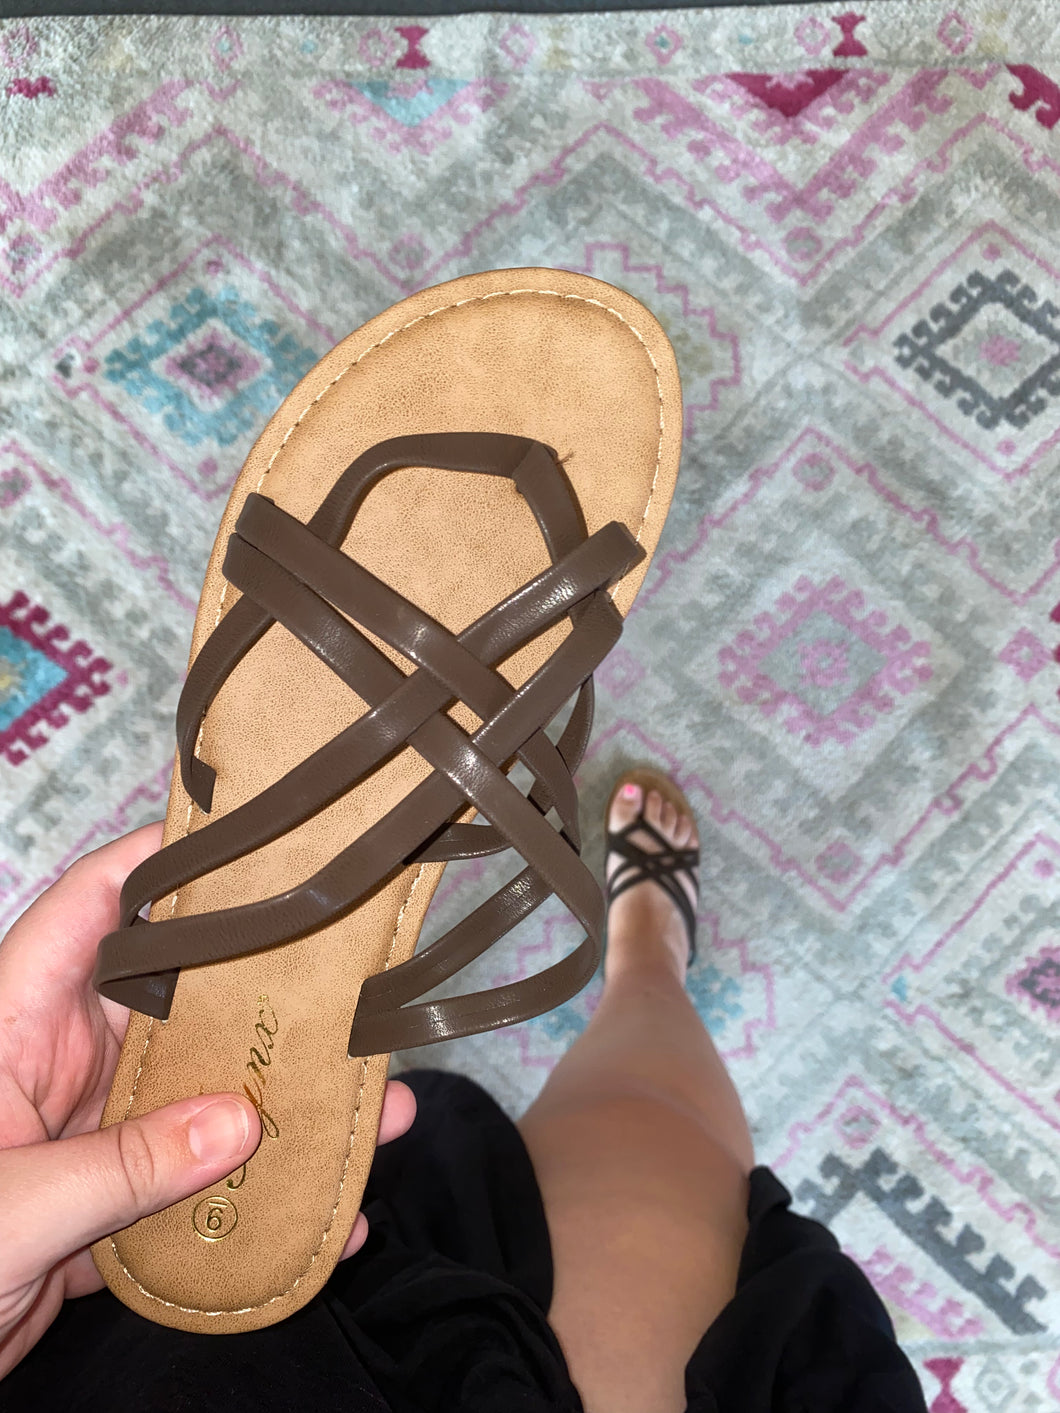 Brown Strappy Sandals